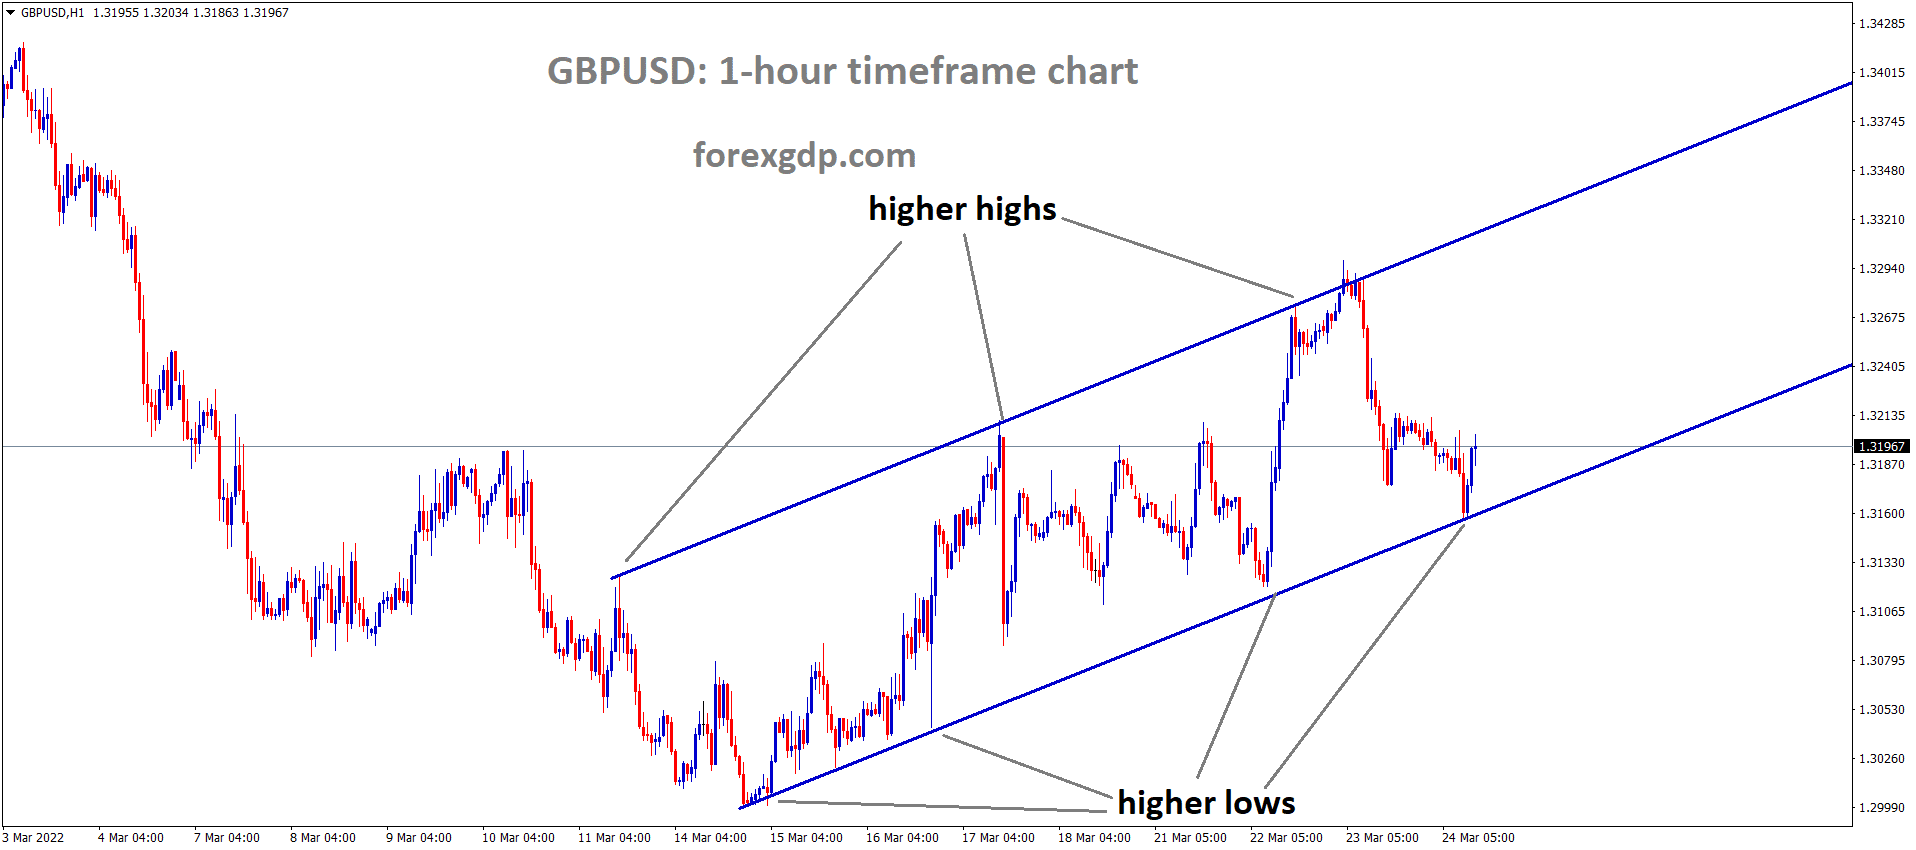 GBPUSD H1 Market has rebounded from the higher low area of the Ascending channel 1